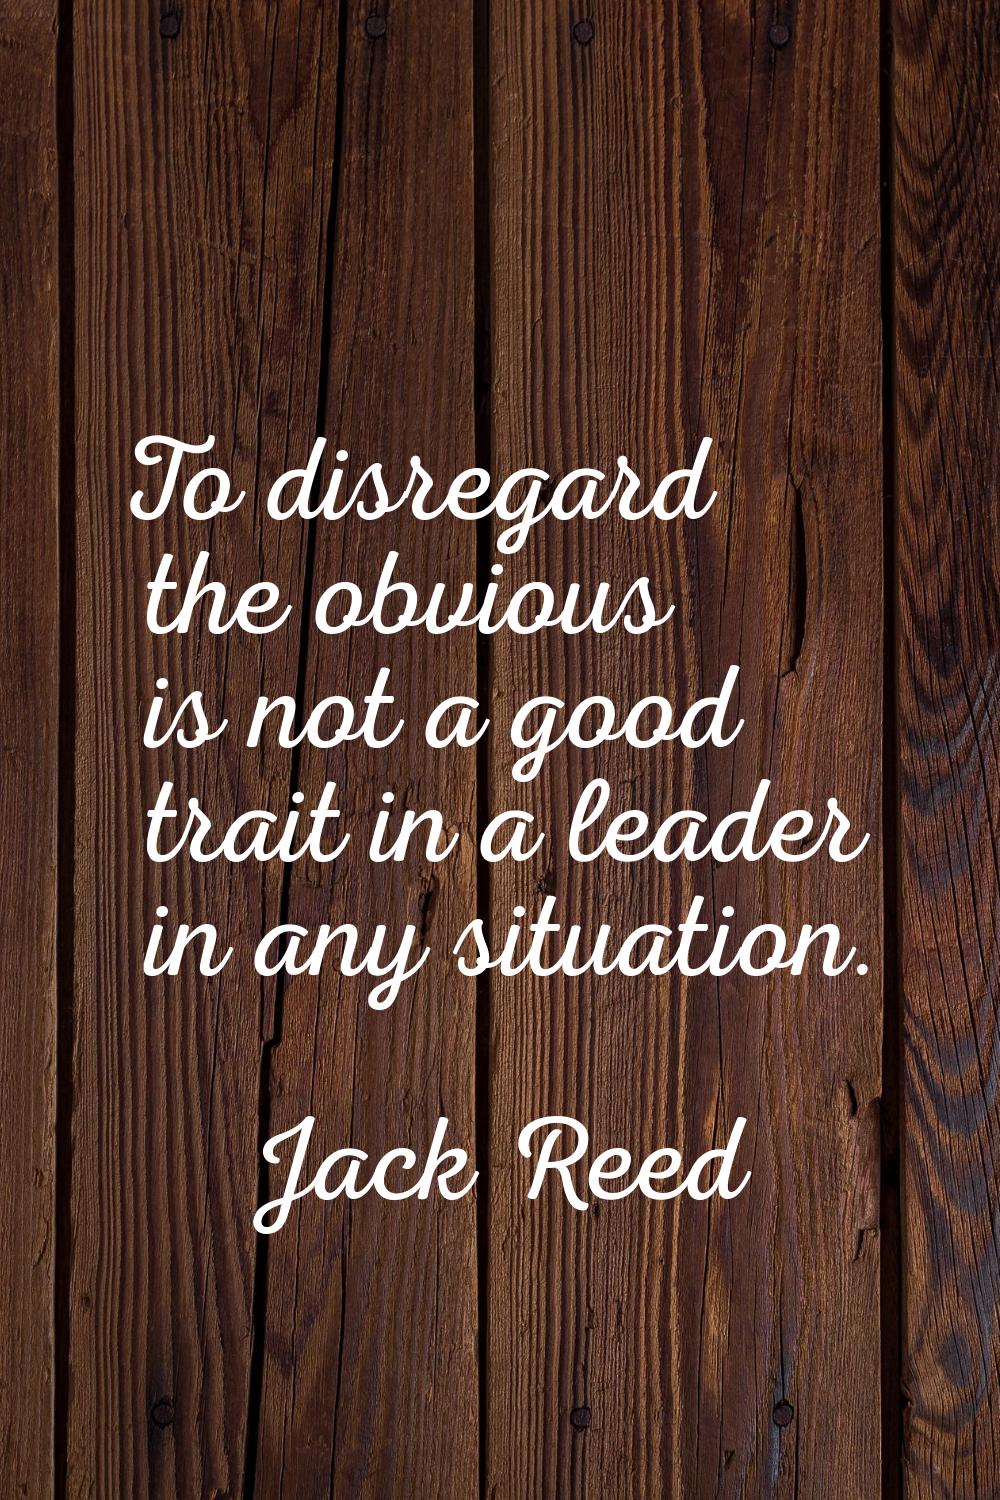 To disregard the obvious is not a good trait in a leader in any situation.